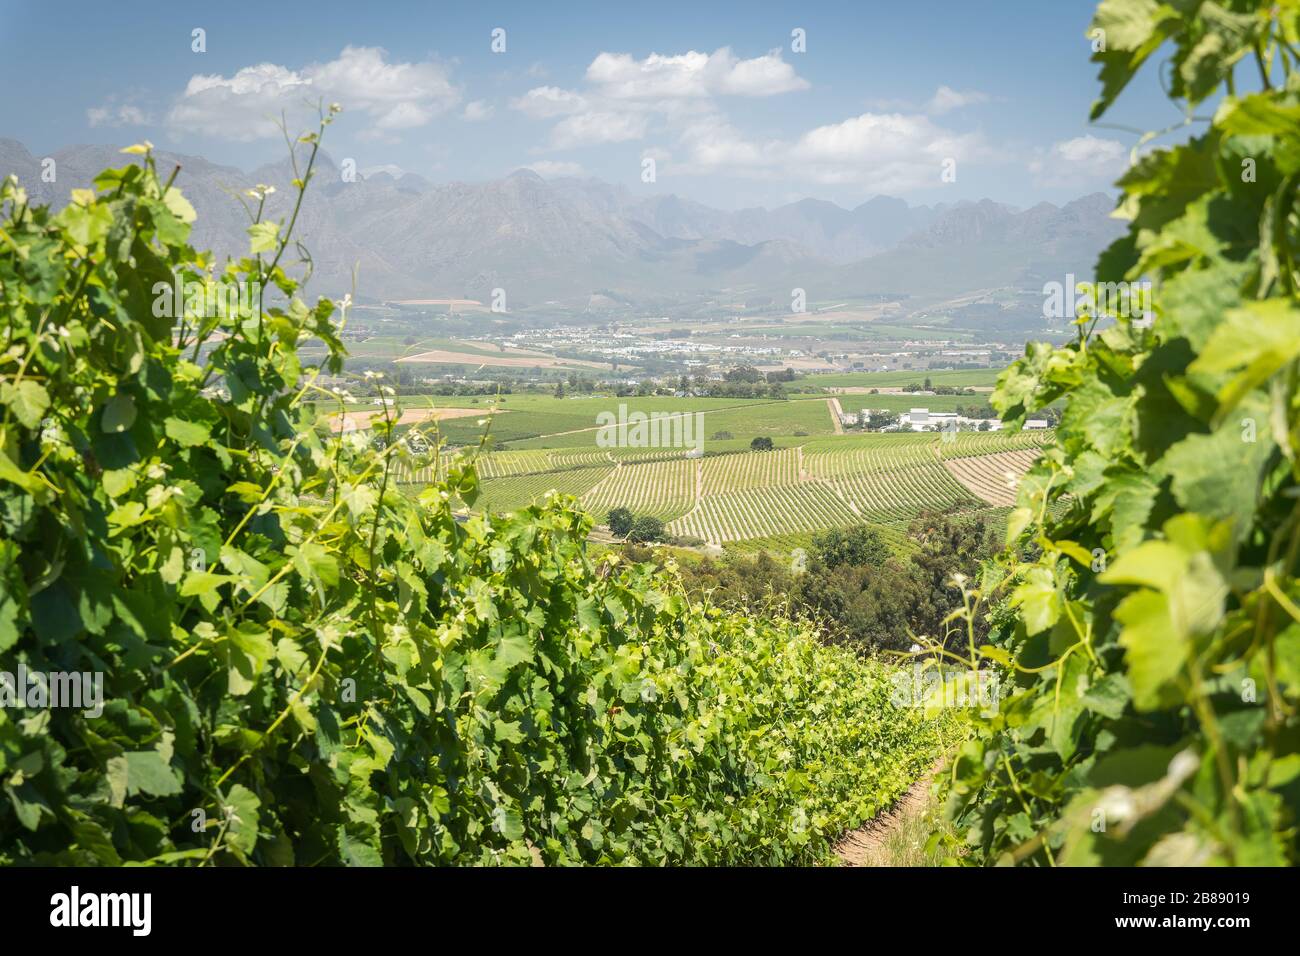 Near Stellenbosch, Western Cape Province, South Africa - December 1, 2019 - View across vineyards with the Simonsberg mountain in the background Stock Photo